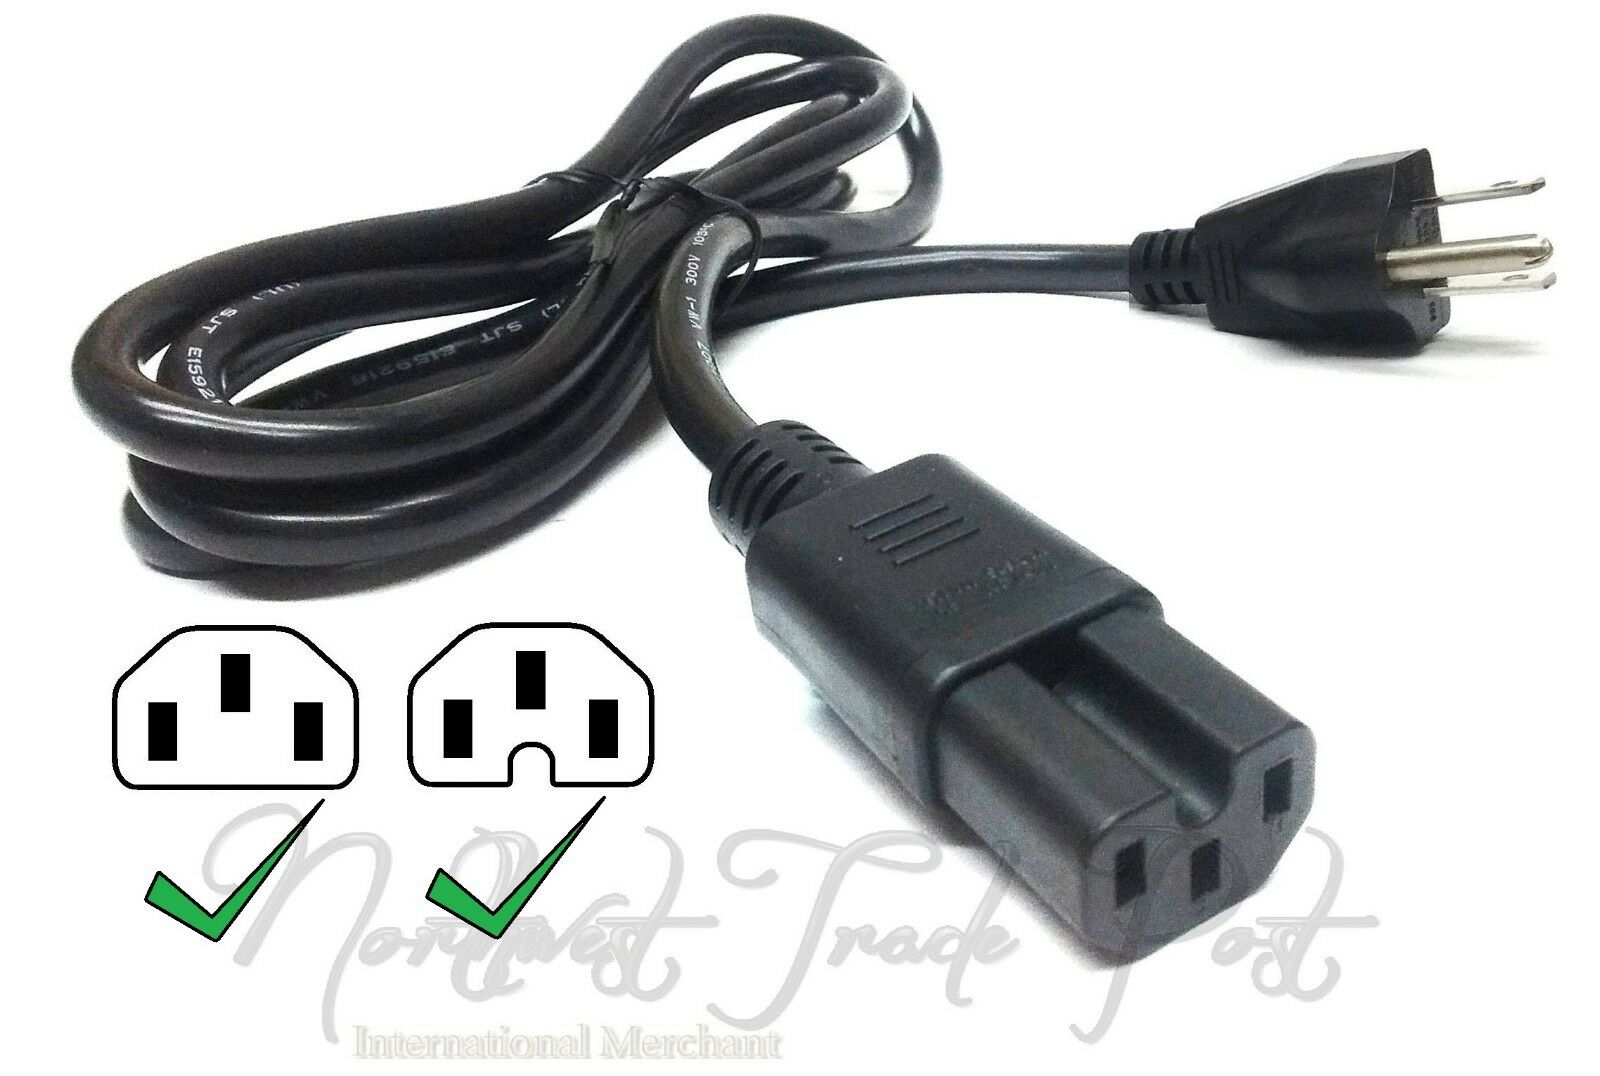 AC Power Cord Supply for ION iPA105Q Pathfinder II 2 Charger Bluetooth Speaker Model: iPA105 Modified Item: No Count